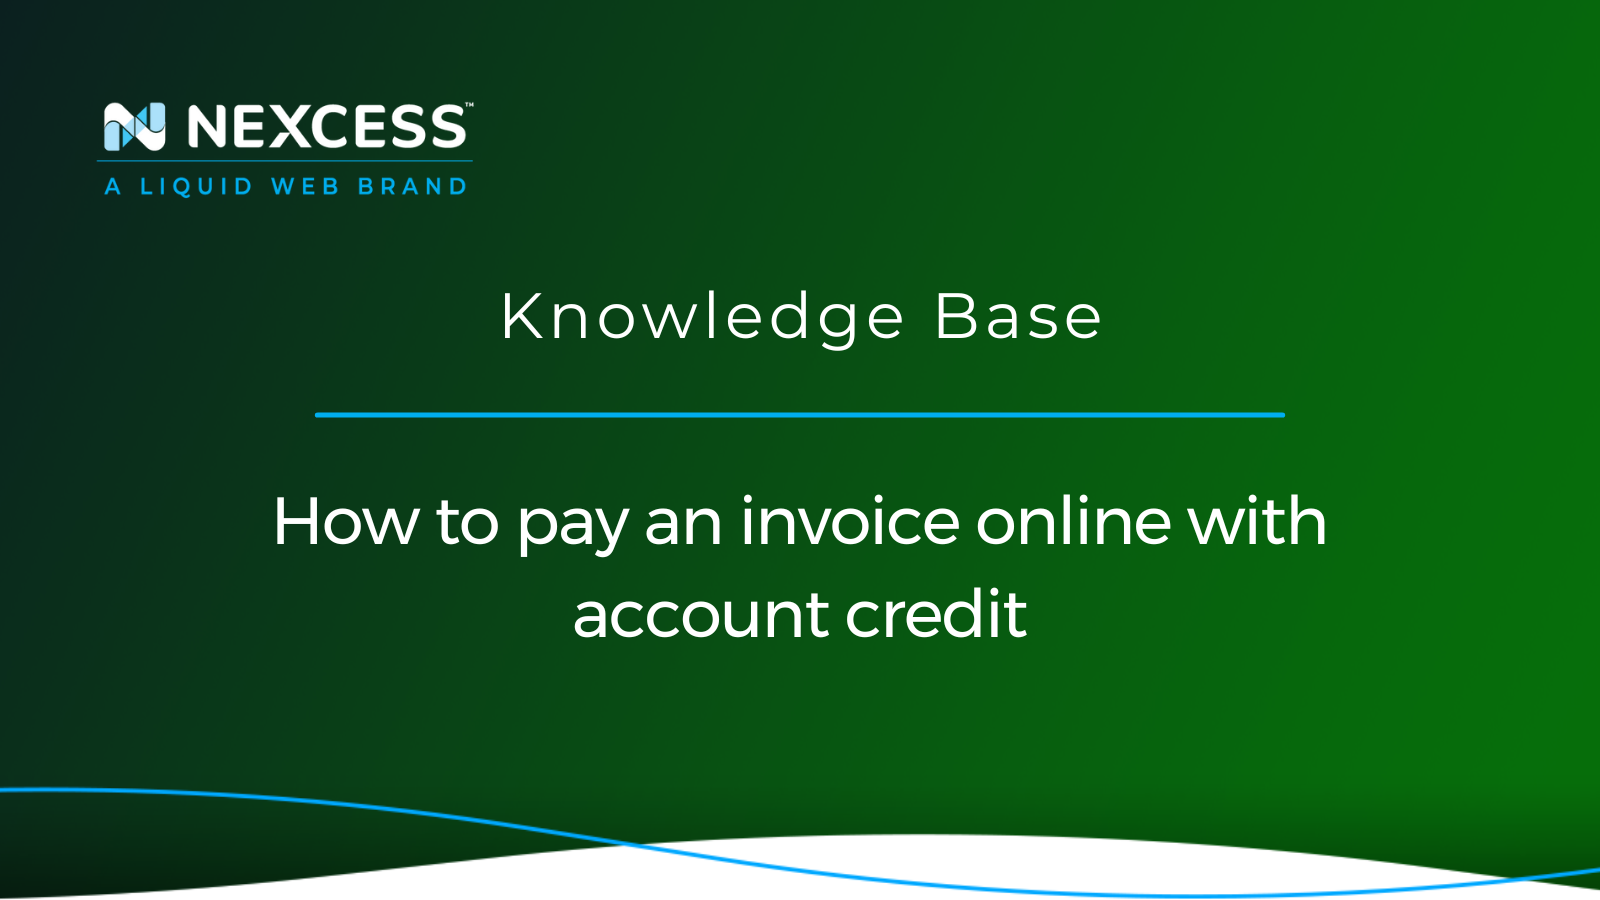 How to pay an invoice online with account credit